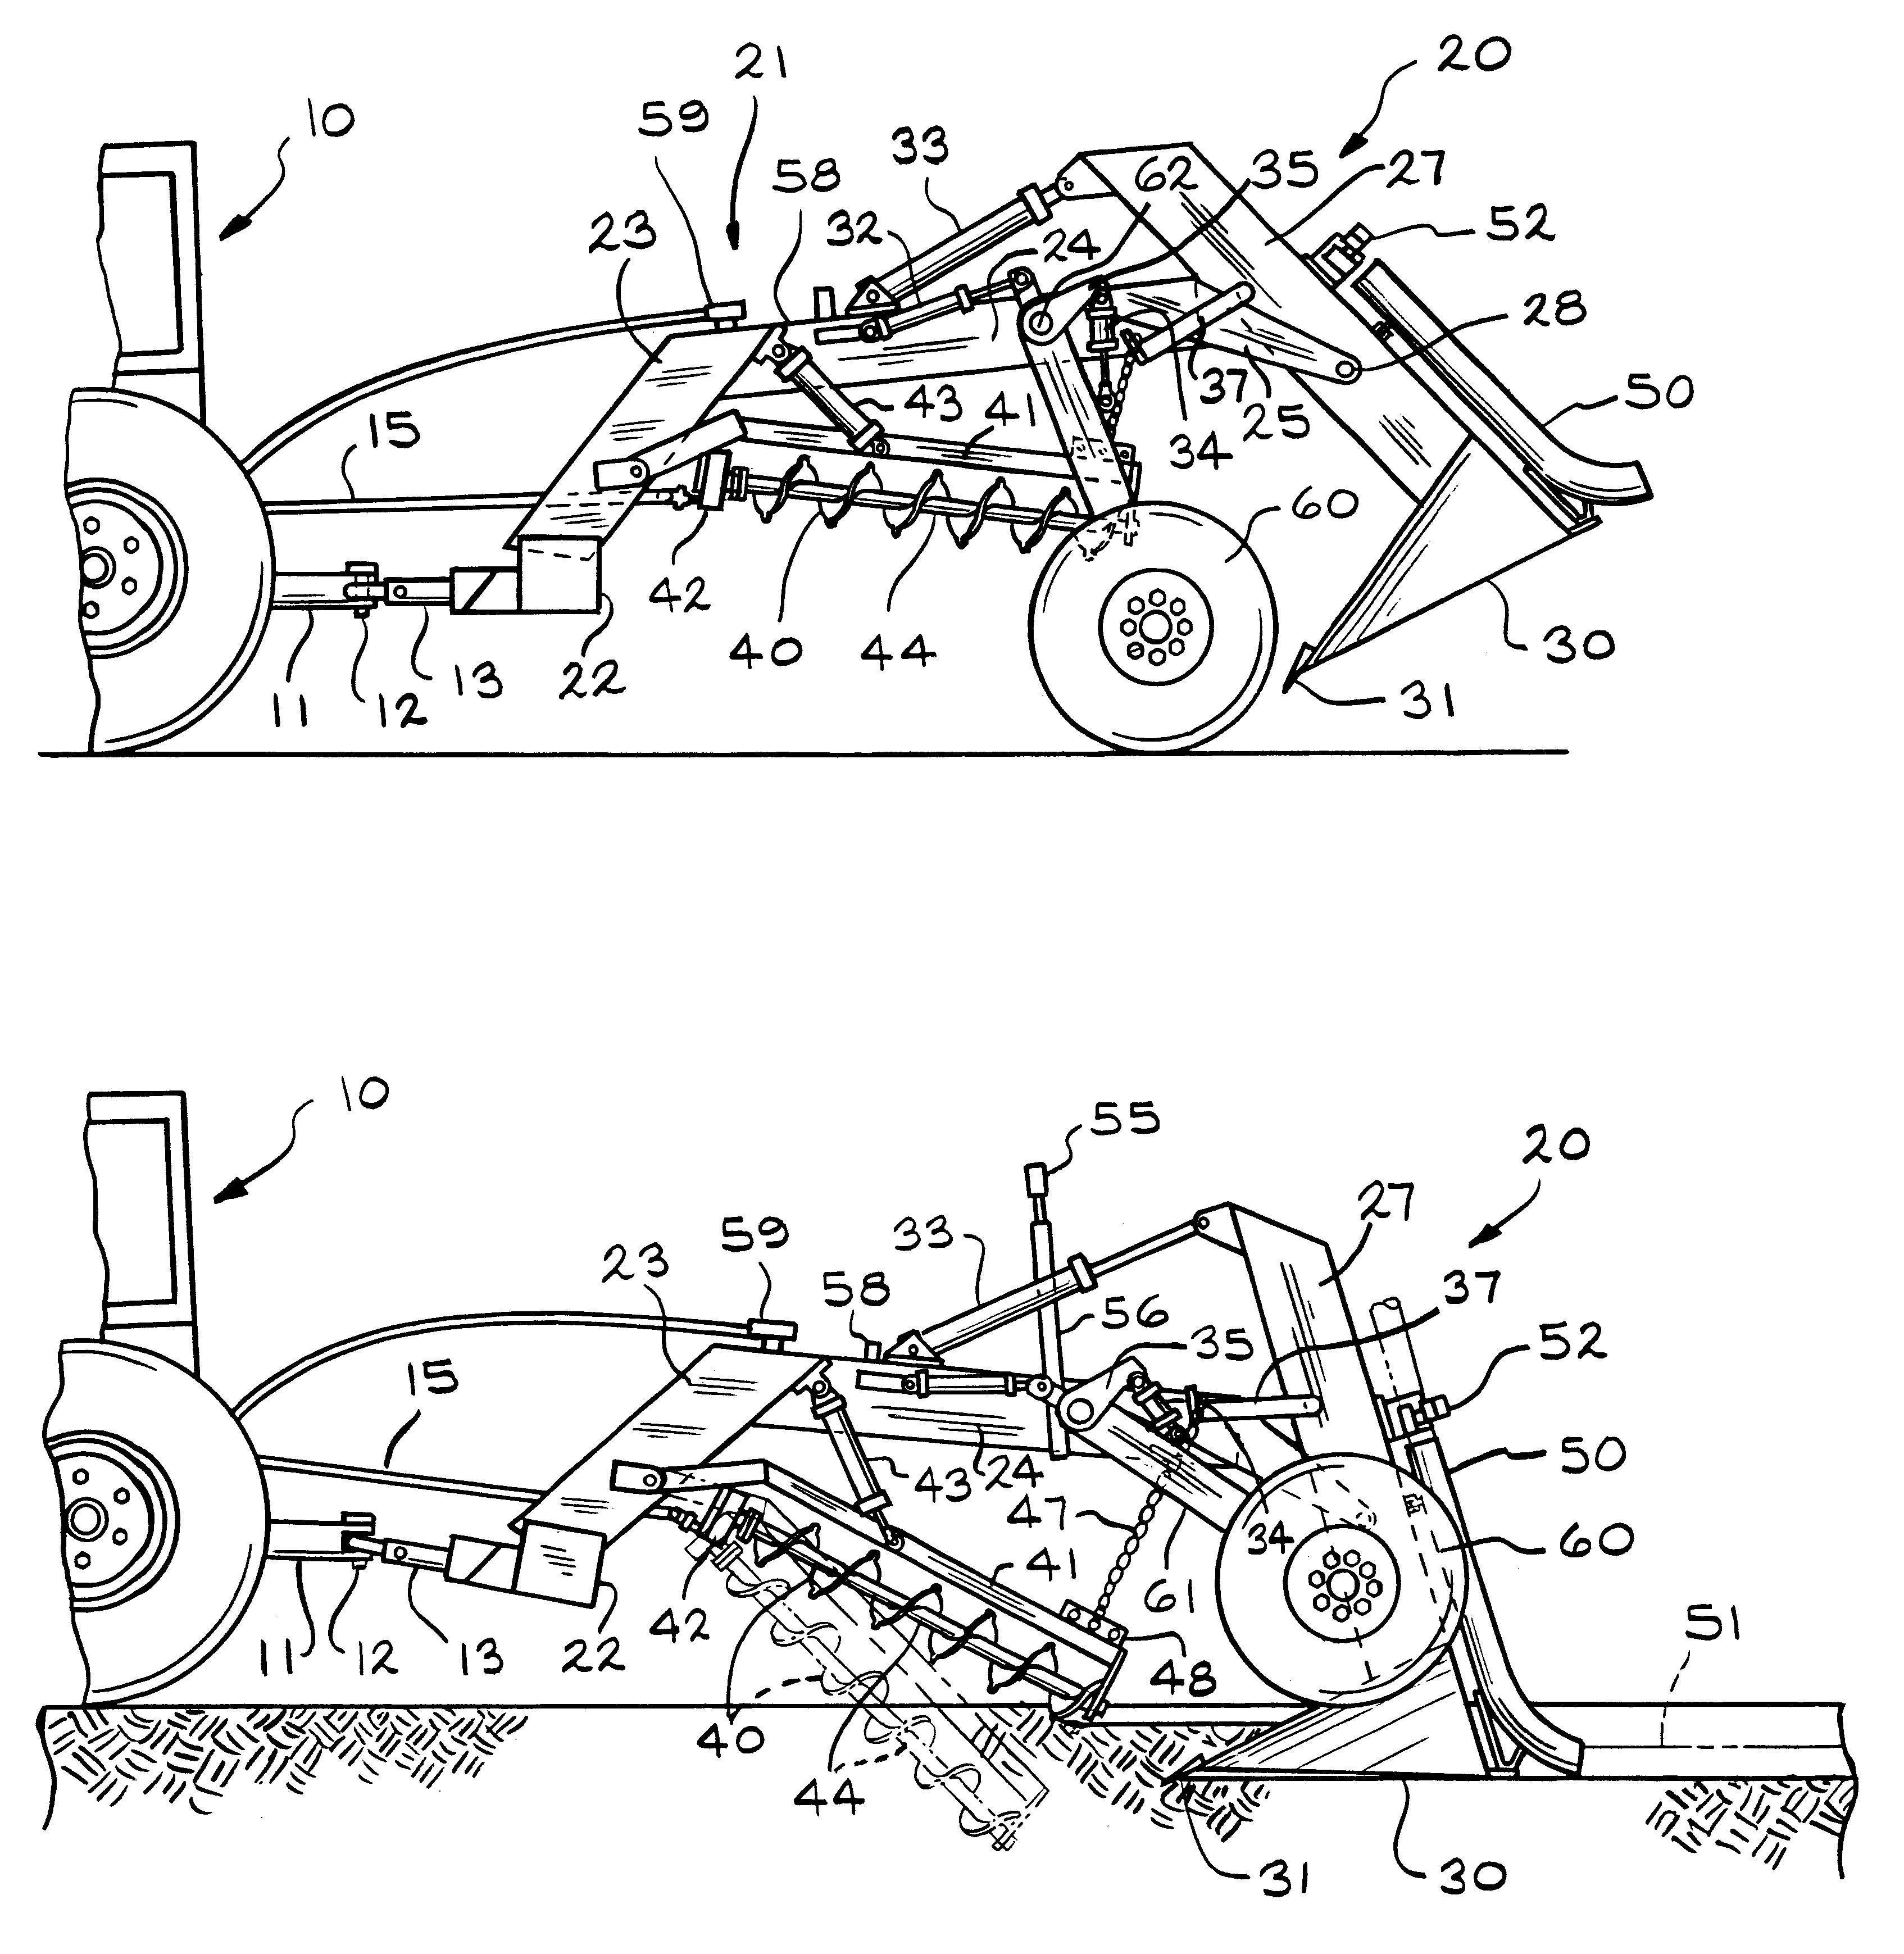 Trencher plow for laying pipe